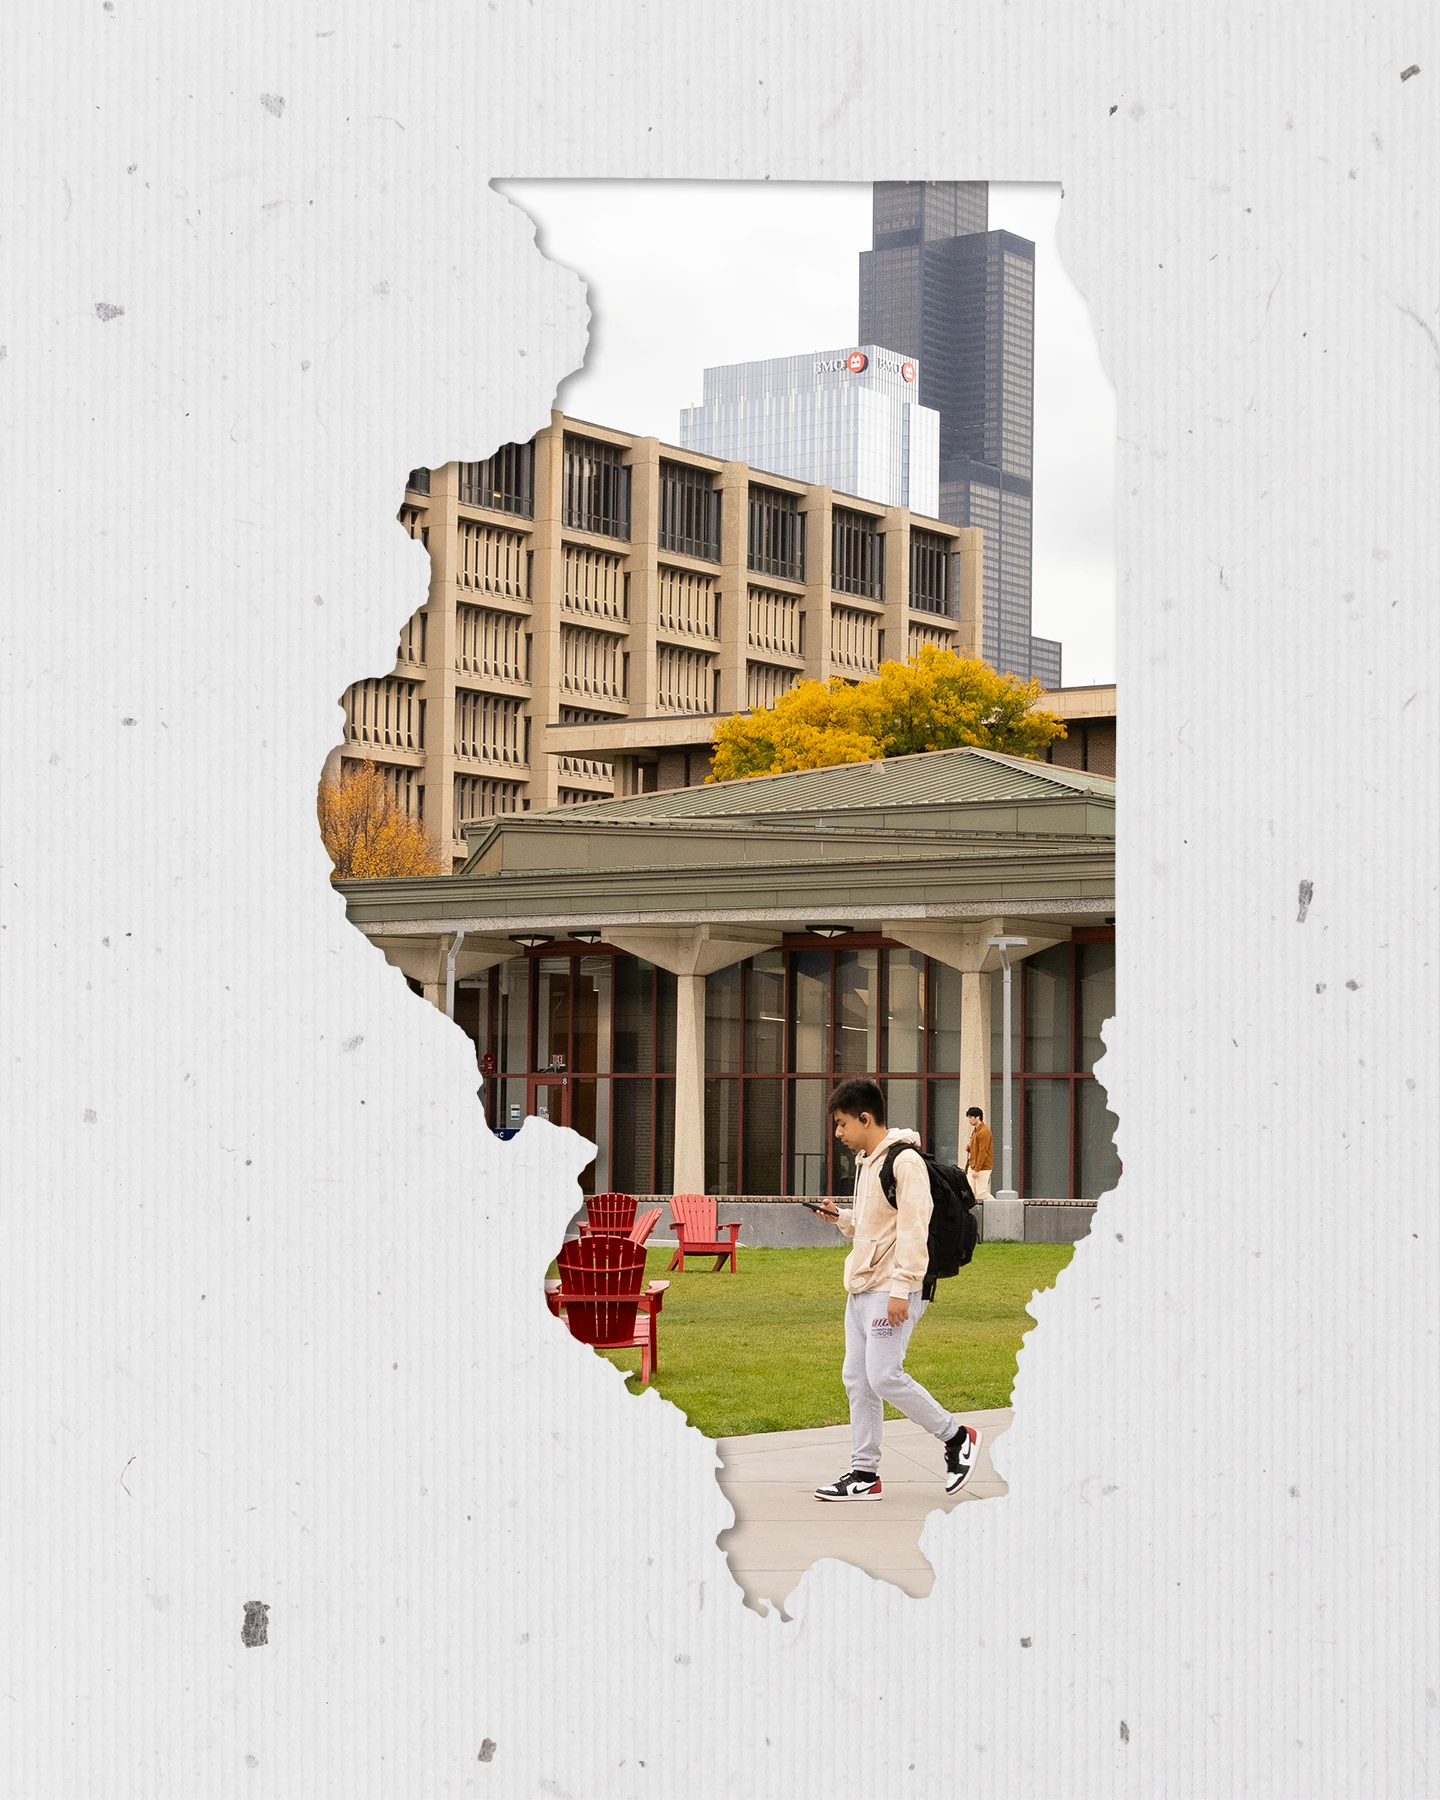 Students walking in front of buildings on the campus of The University of Illinois at Chicago in a image cutout in the shape of the state of Illinois